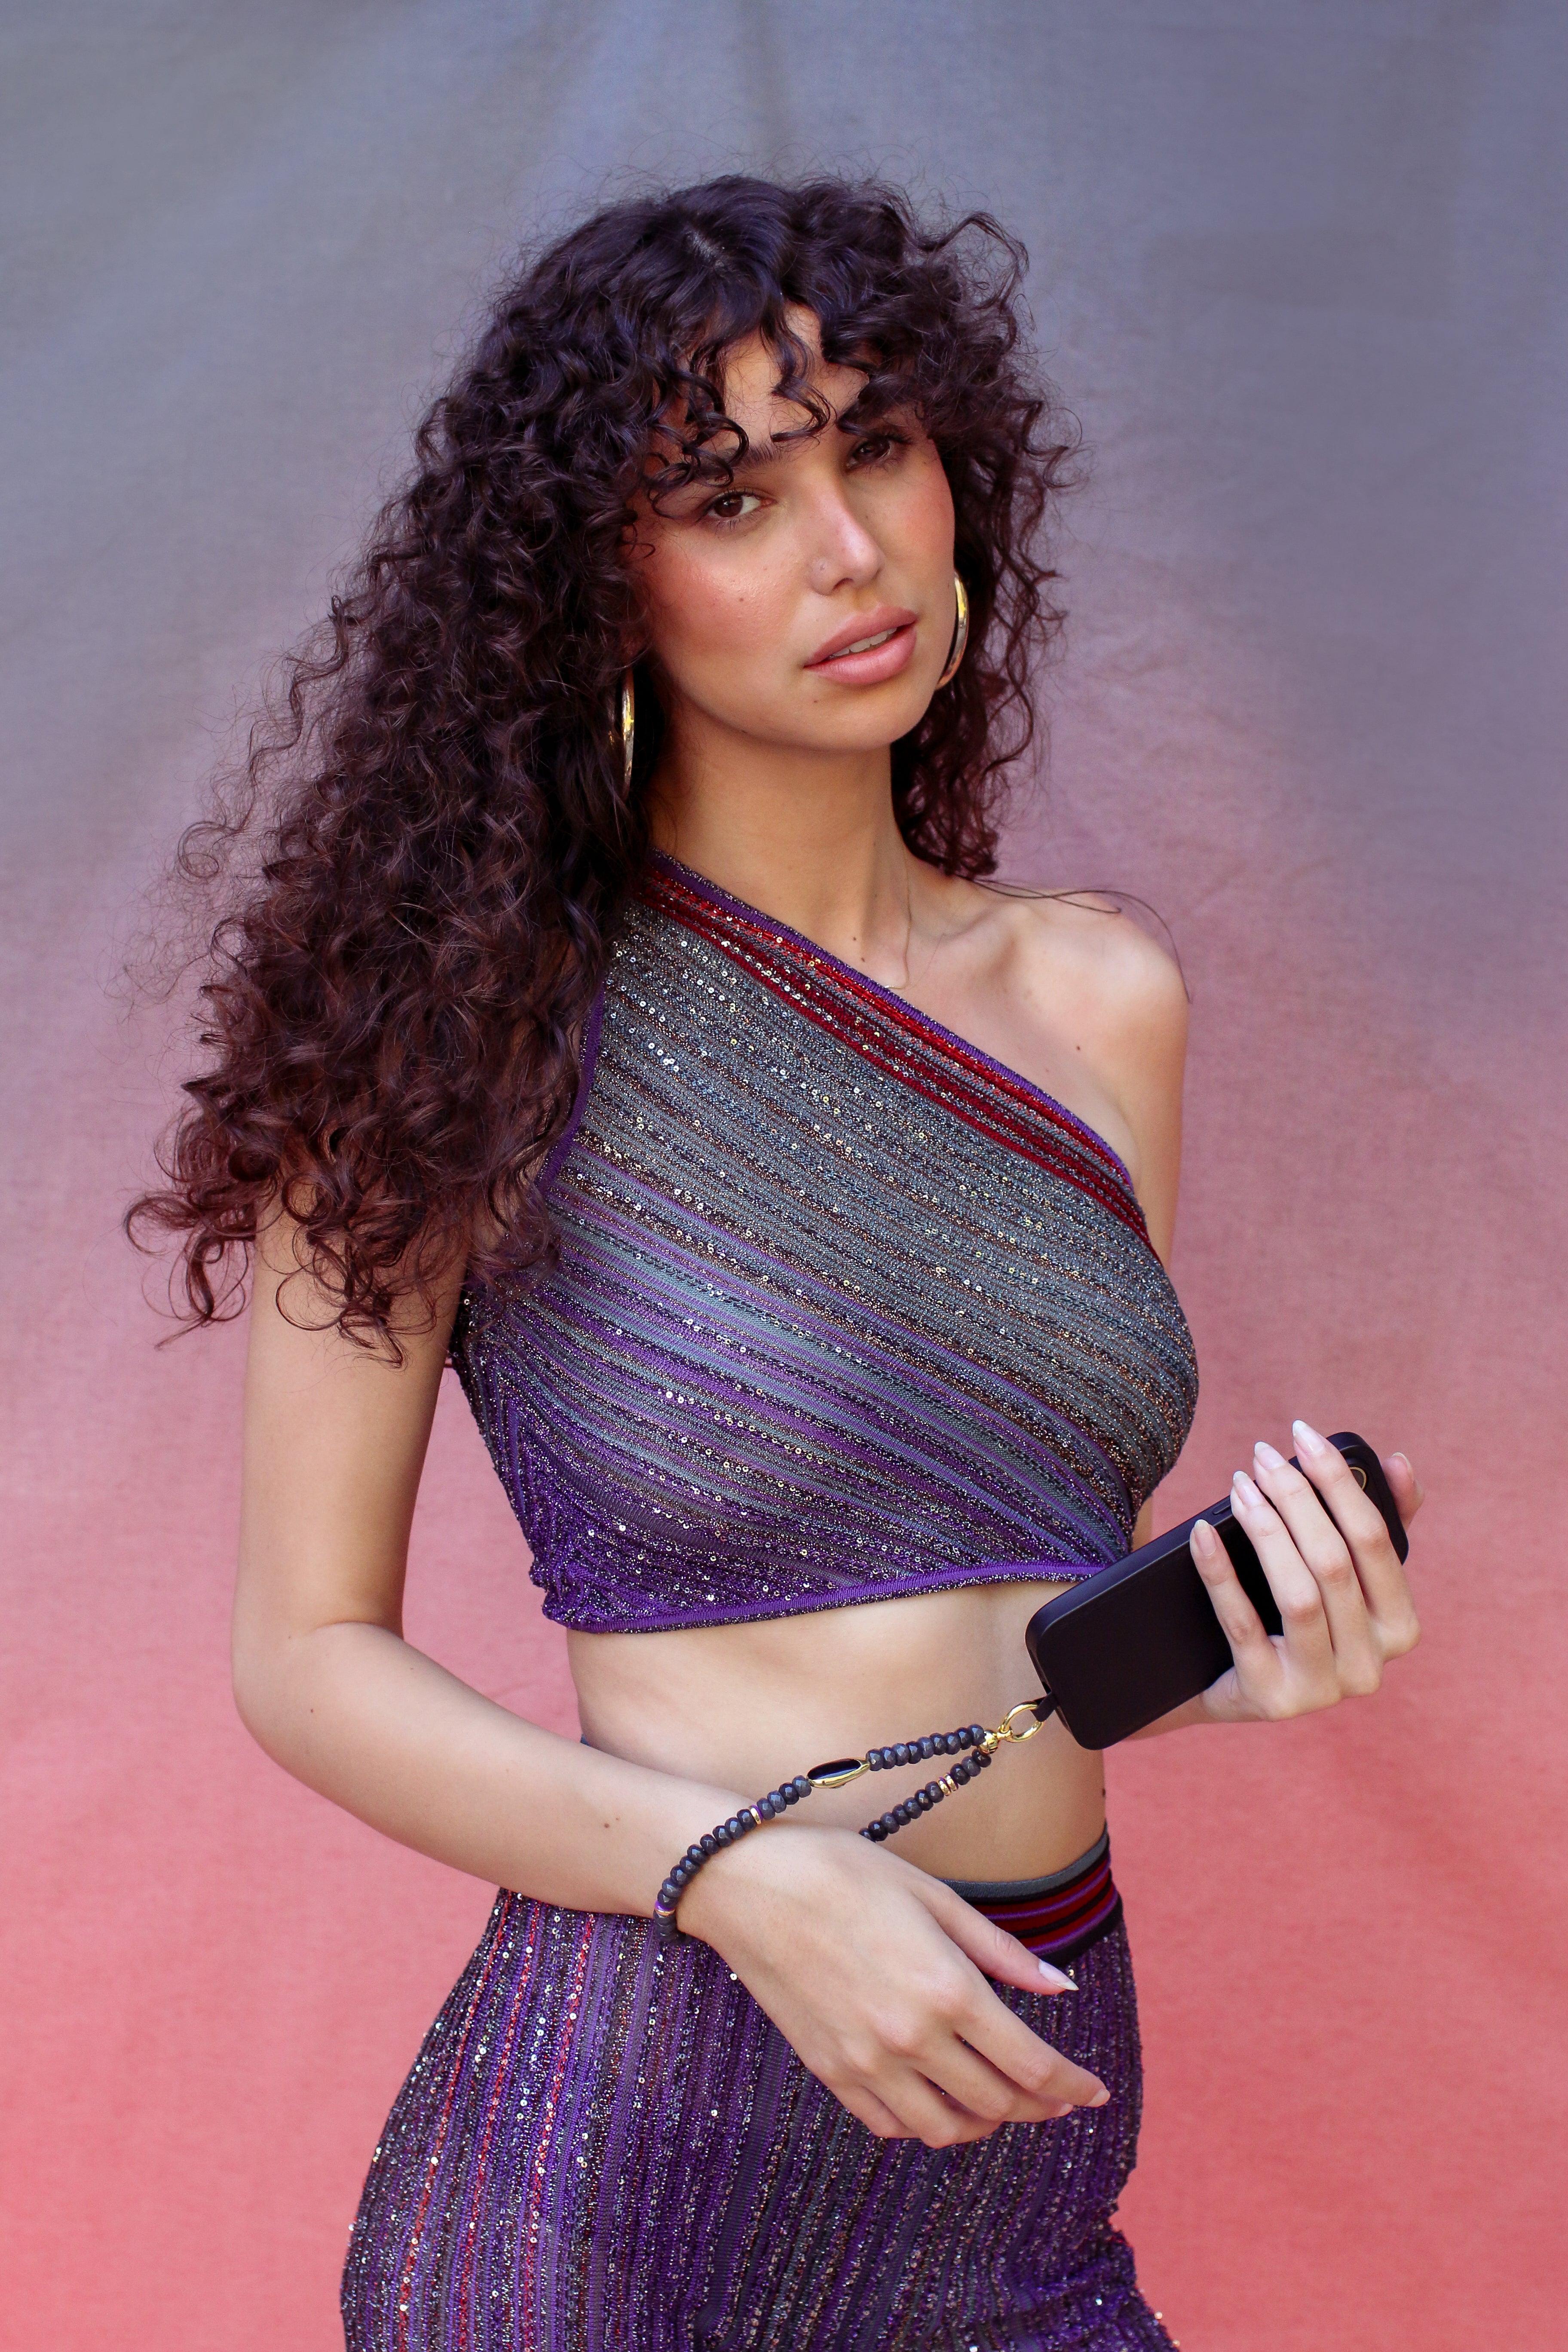 A young woman holding a black phone with its beaded strap around her wrist